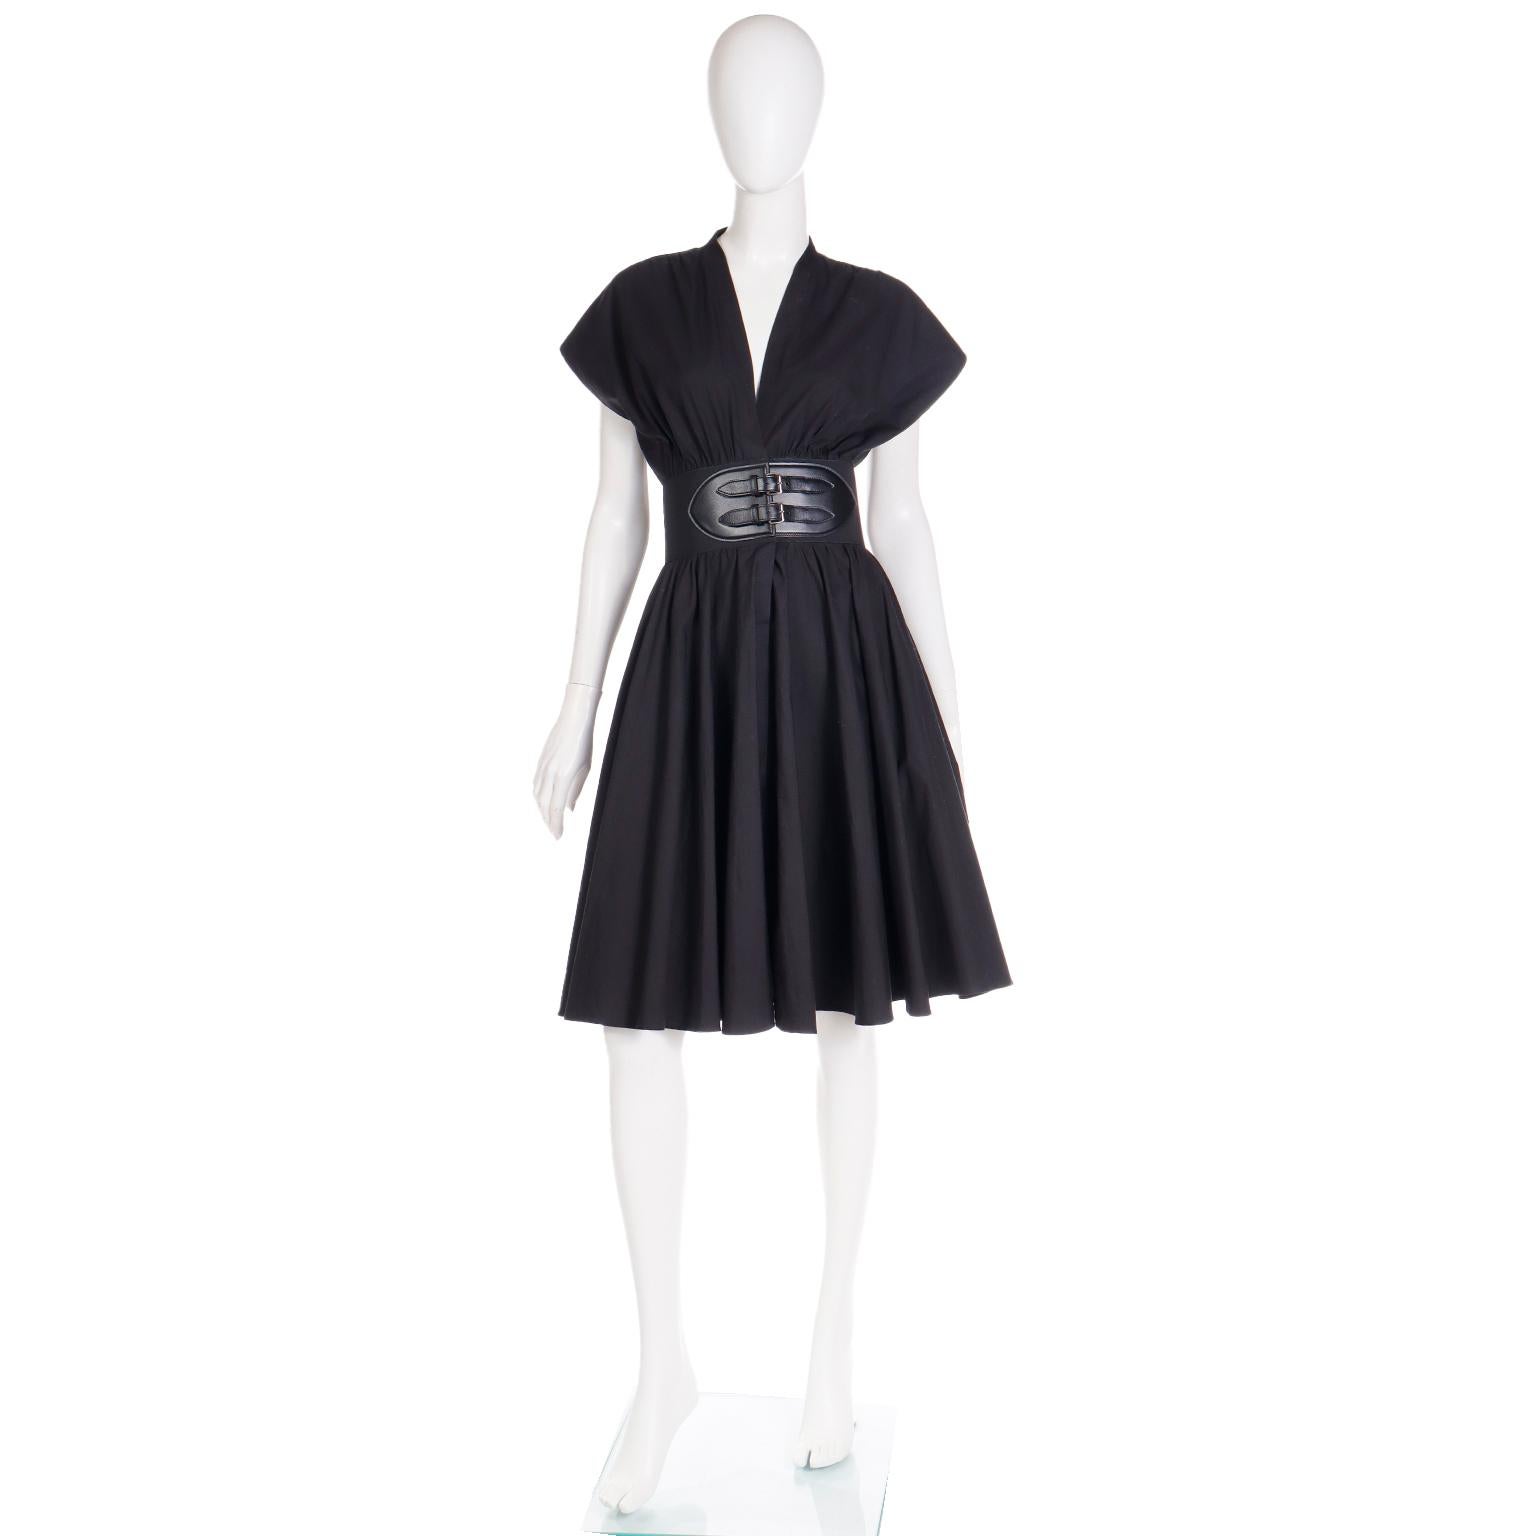 This easy to wear, modern Alaia dress is in a crisp black cotton poplin and features a built in signature Alaia belt with leather trim. The dress has a fun, full skirt, a deep v bodice and slightly capped sleeves. There are side slit pockets and the